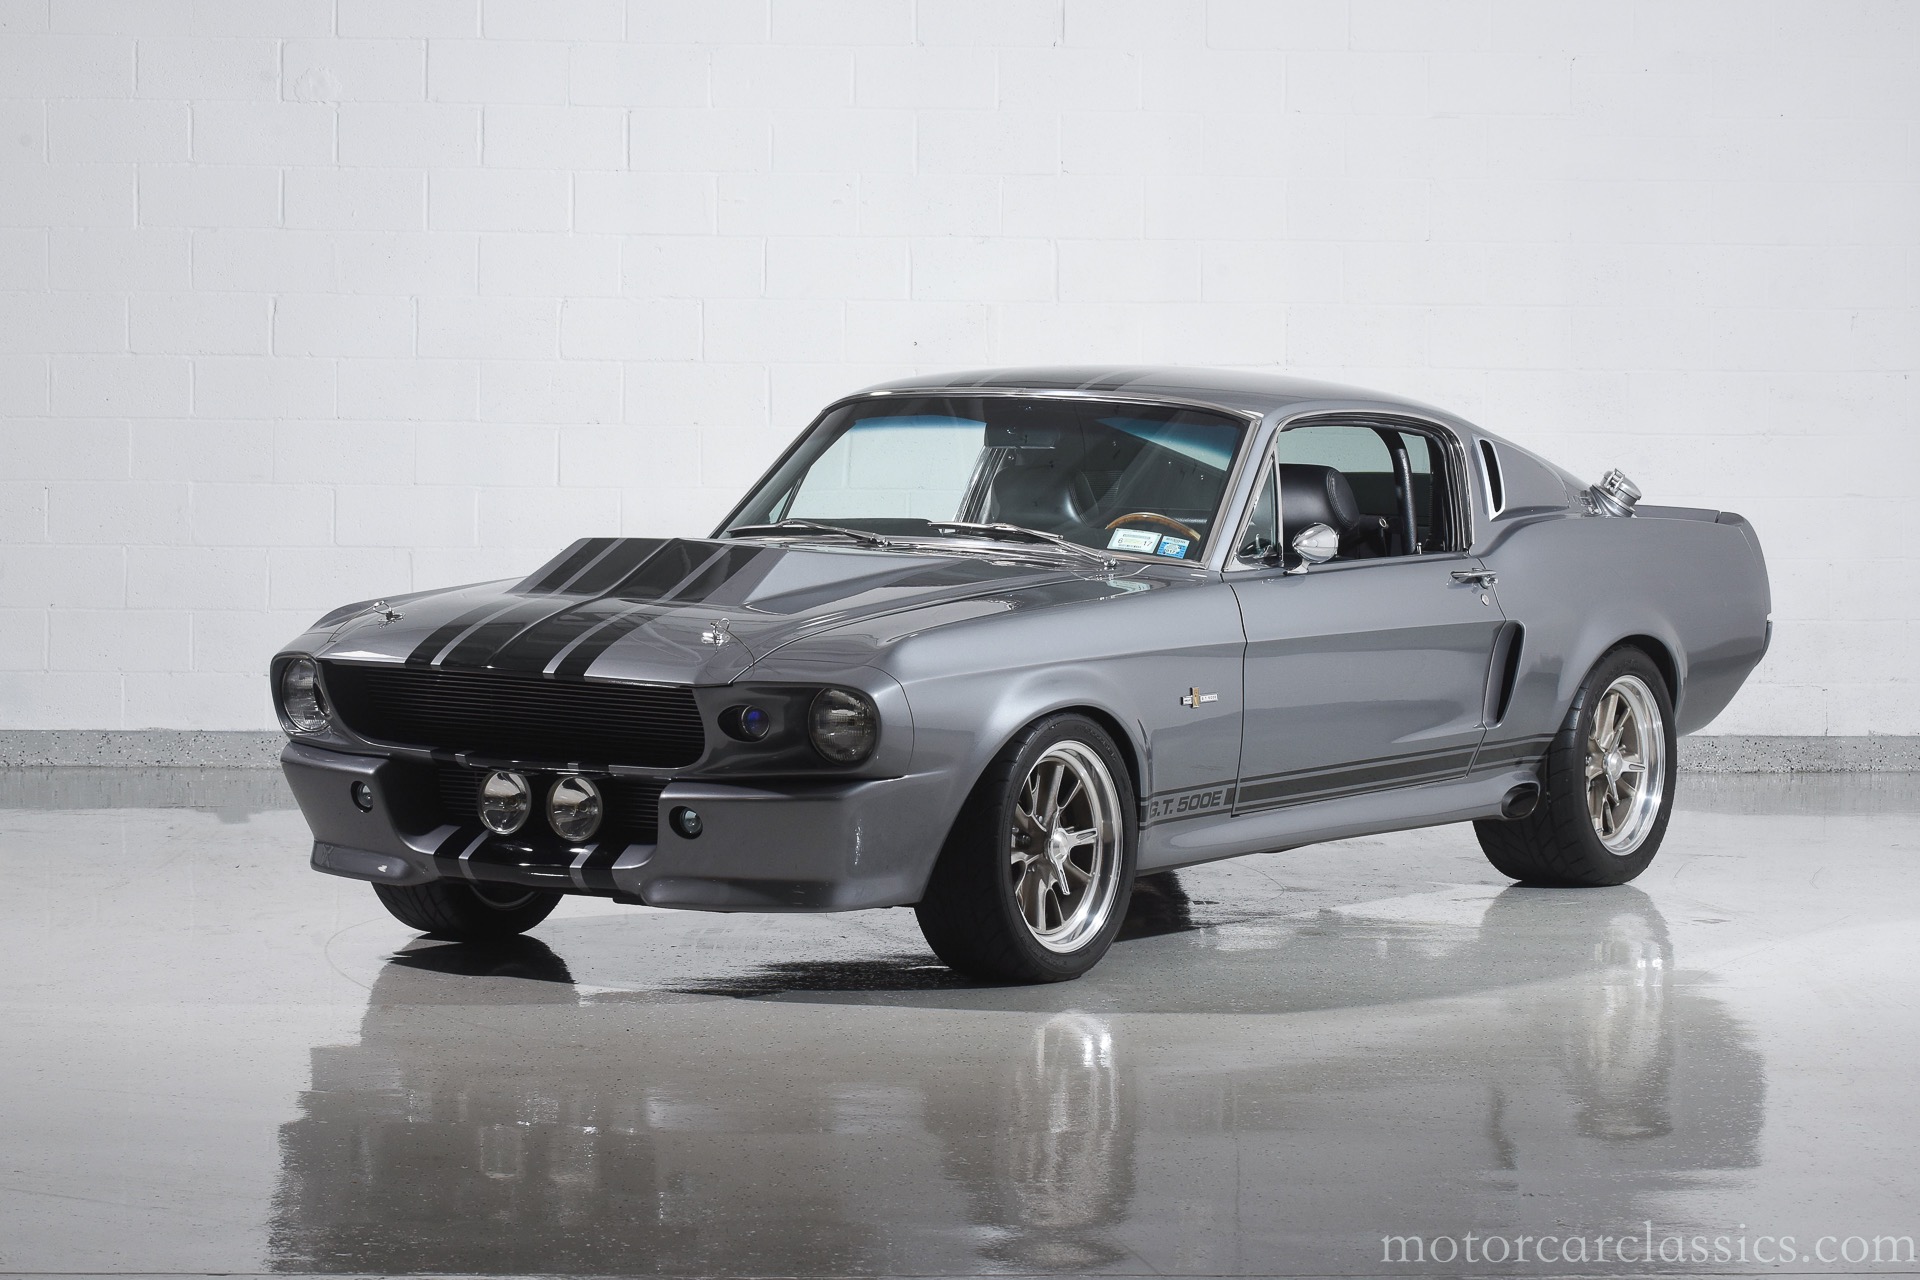 Used 1967 Ford Shelby Mustang Gt500e Super Snake For Sale Special